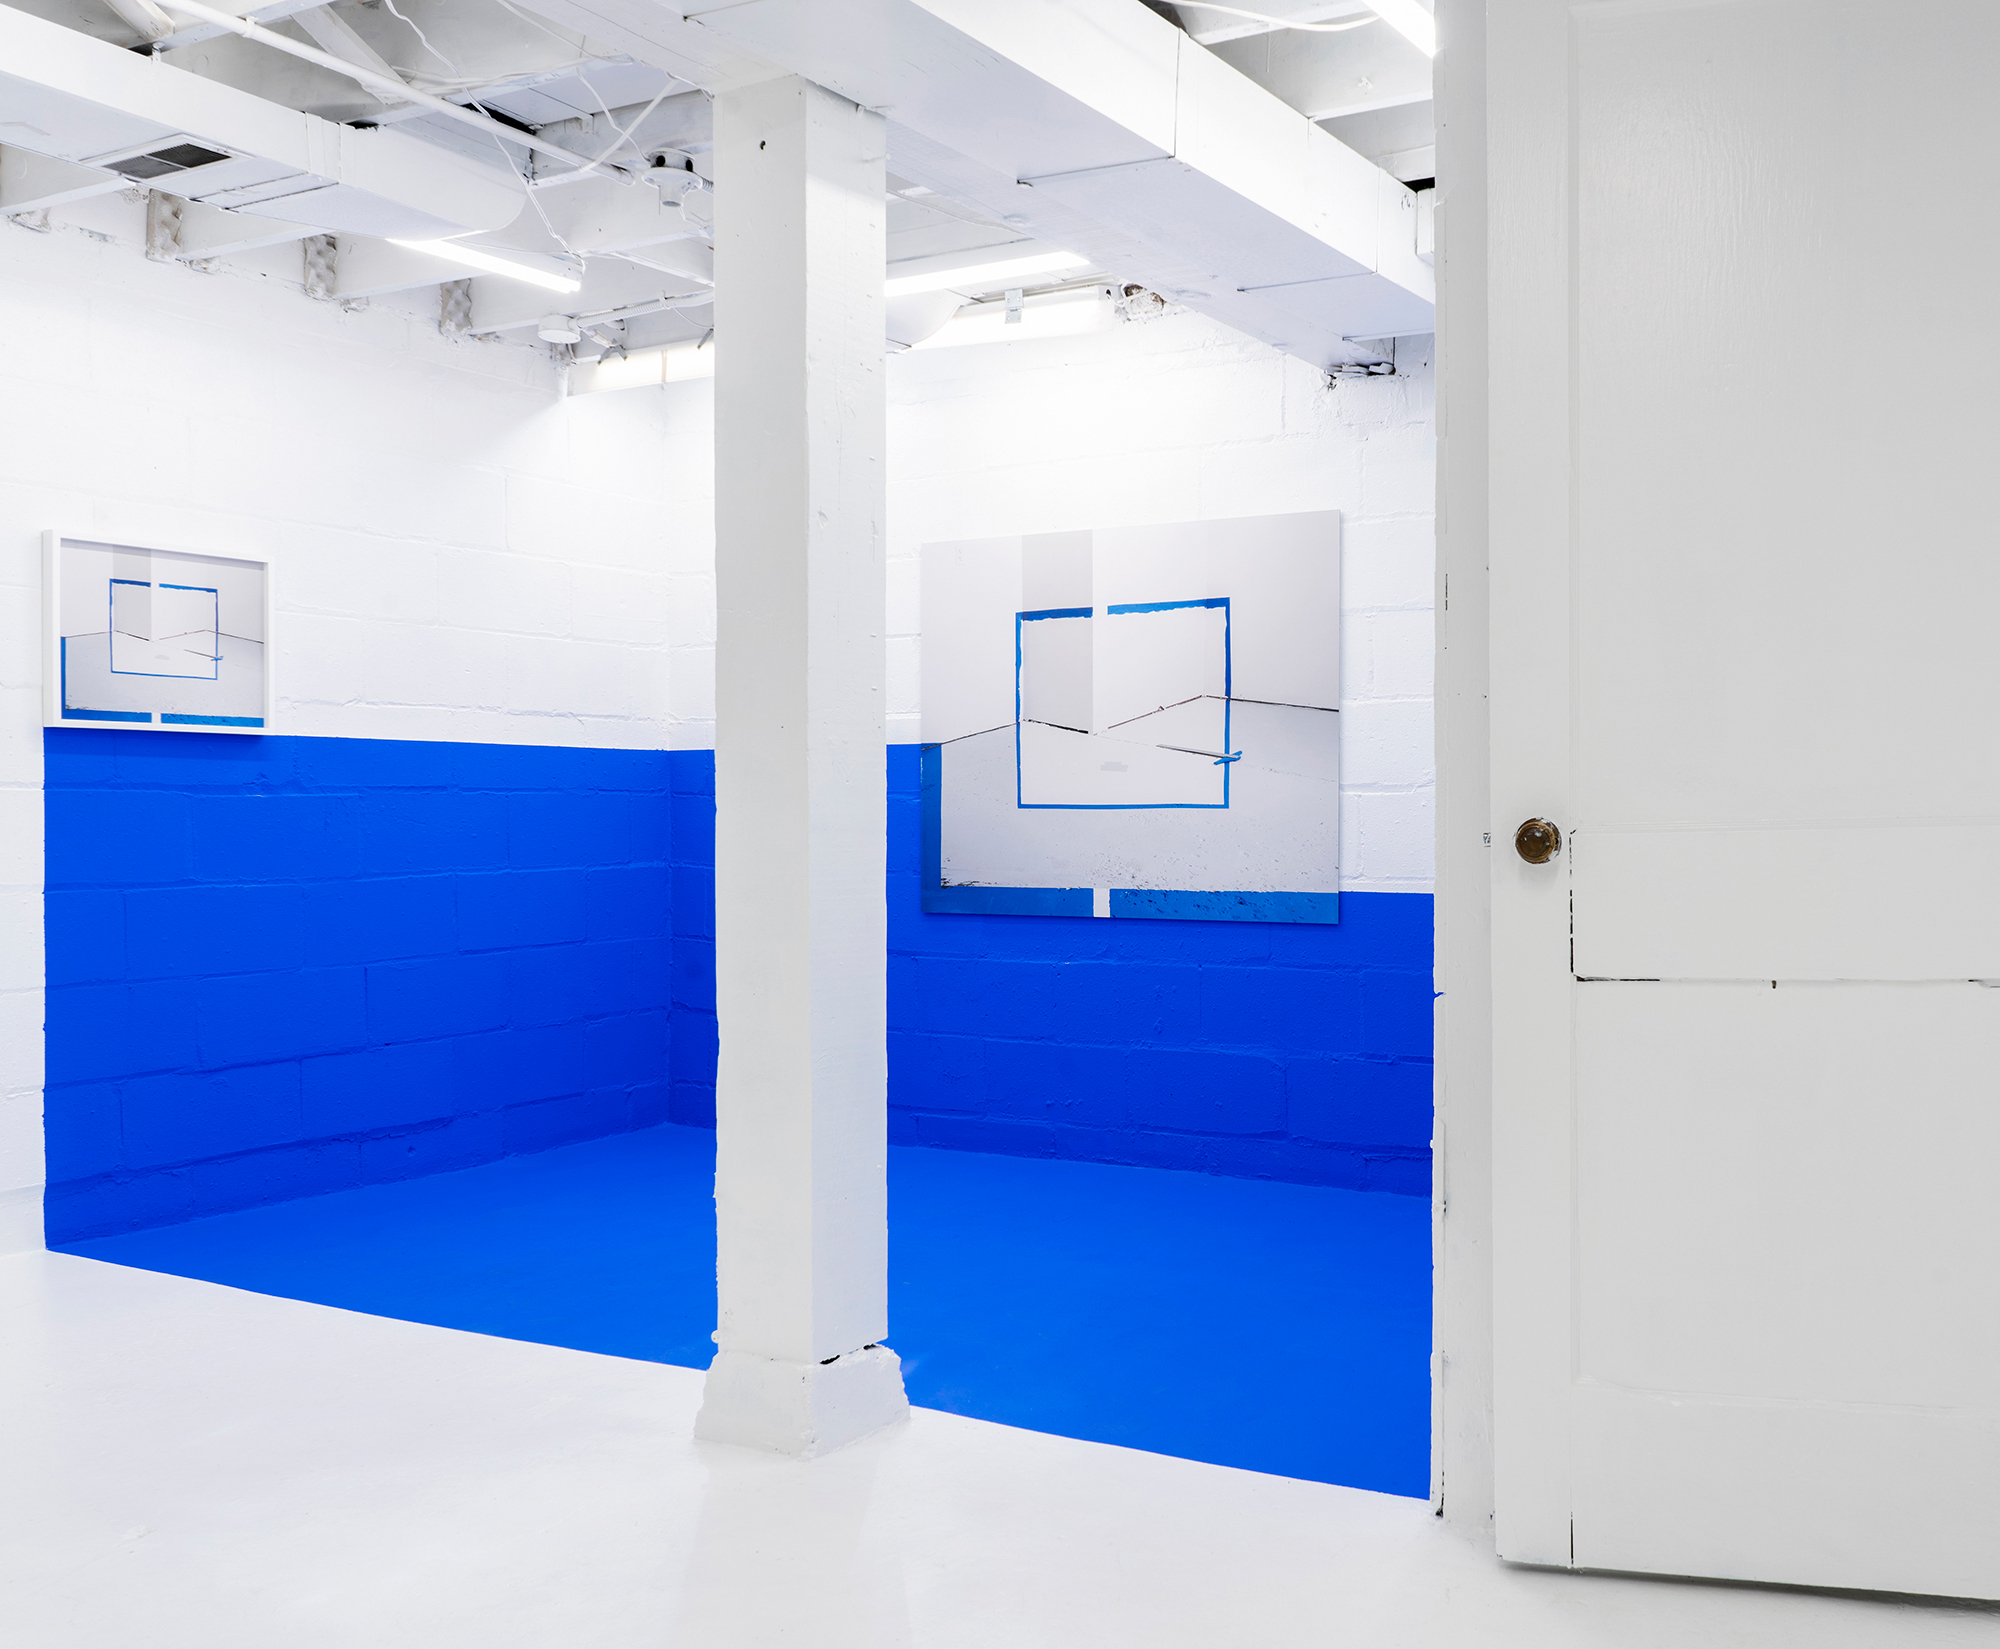 Untitled (blue T-square), 2020, Archival inkjet prints, Choroma key blue paint, 40 x 50 and 16 x 20 inches  Installation view, Interpolation, Hair + Nails Gallery. Photo credit: Meagan Marsh